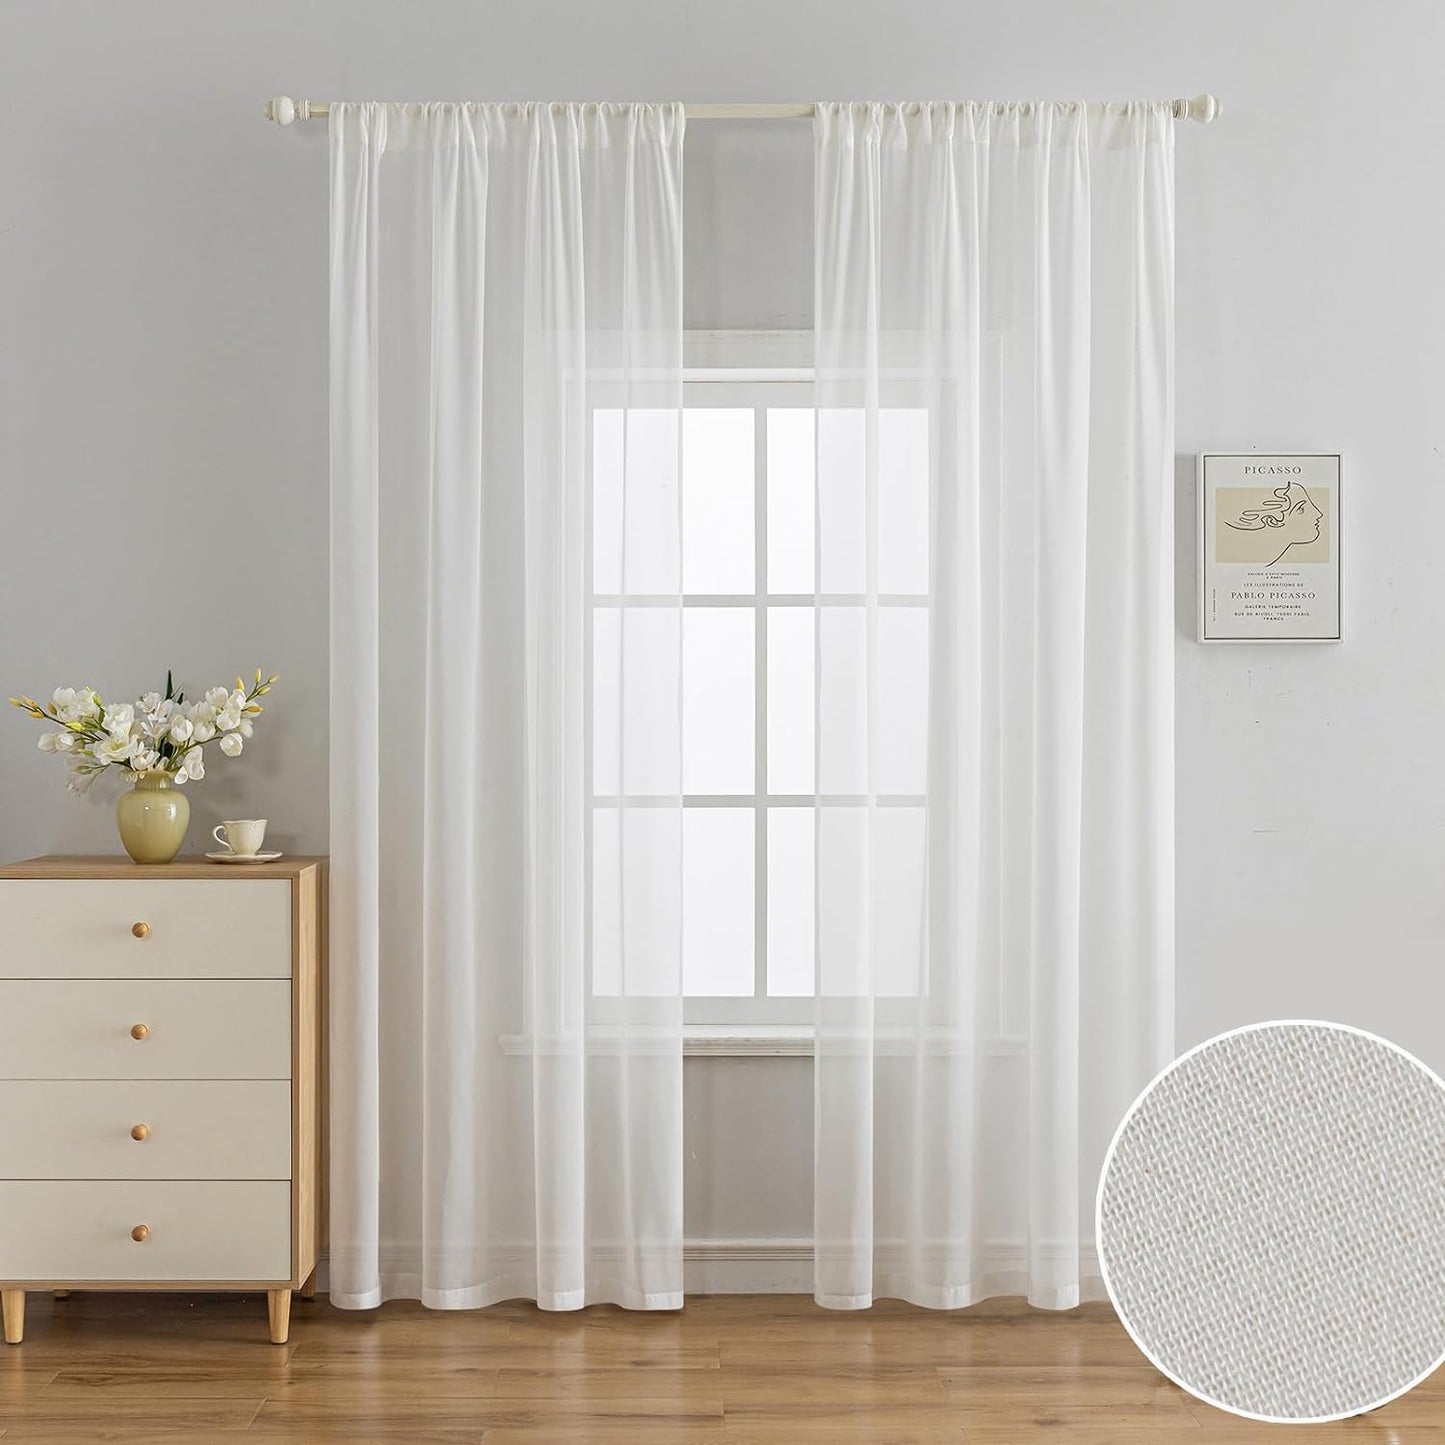 LUGOTAL Pinch Pleated Drapes 108 Inches Long 1 Panel off White Chiffon Sheer Curtains for Living Room and Bedroom Semi-Sheer Light Filtering Curtains & Drapes for Sliding Glass Door, W52 X L108  LUGOTAL Rod Pocket - Off White (W52" X L96")*Rod Pocket 